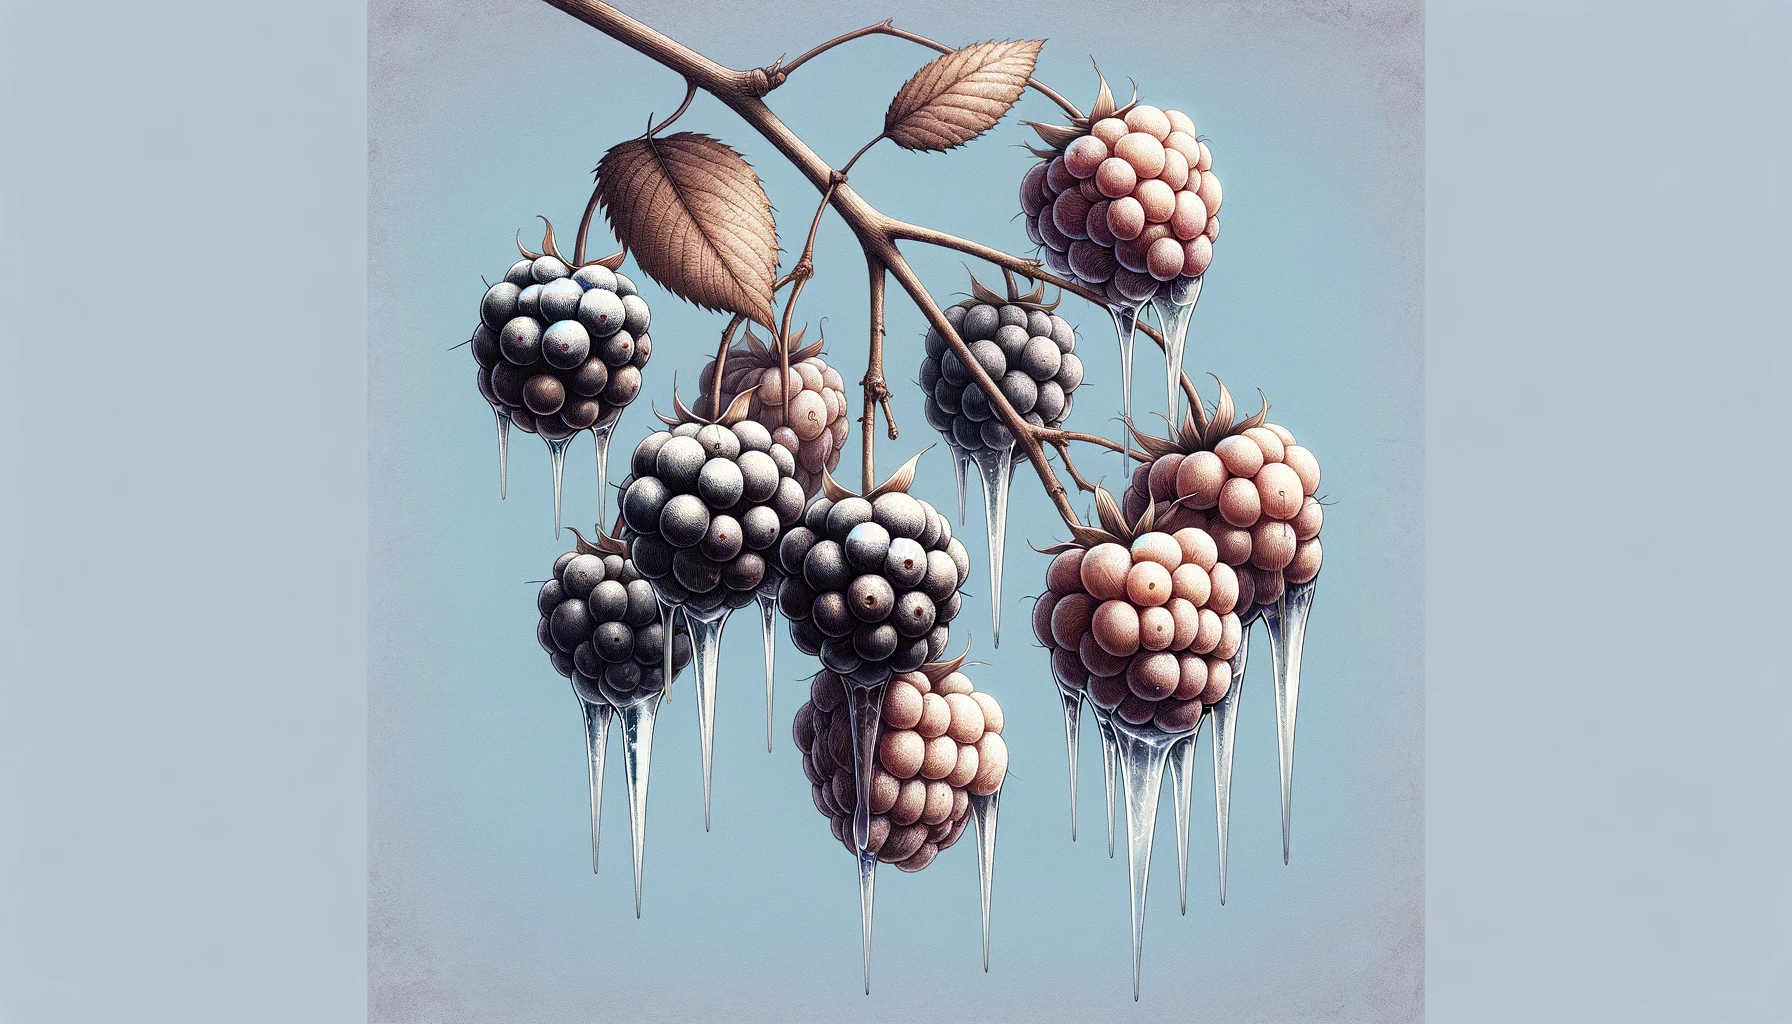 Frozen Blackberries With Icicles Hanging Off Set On Top Of A Light Blue Background